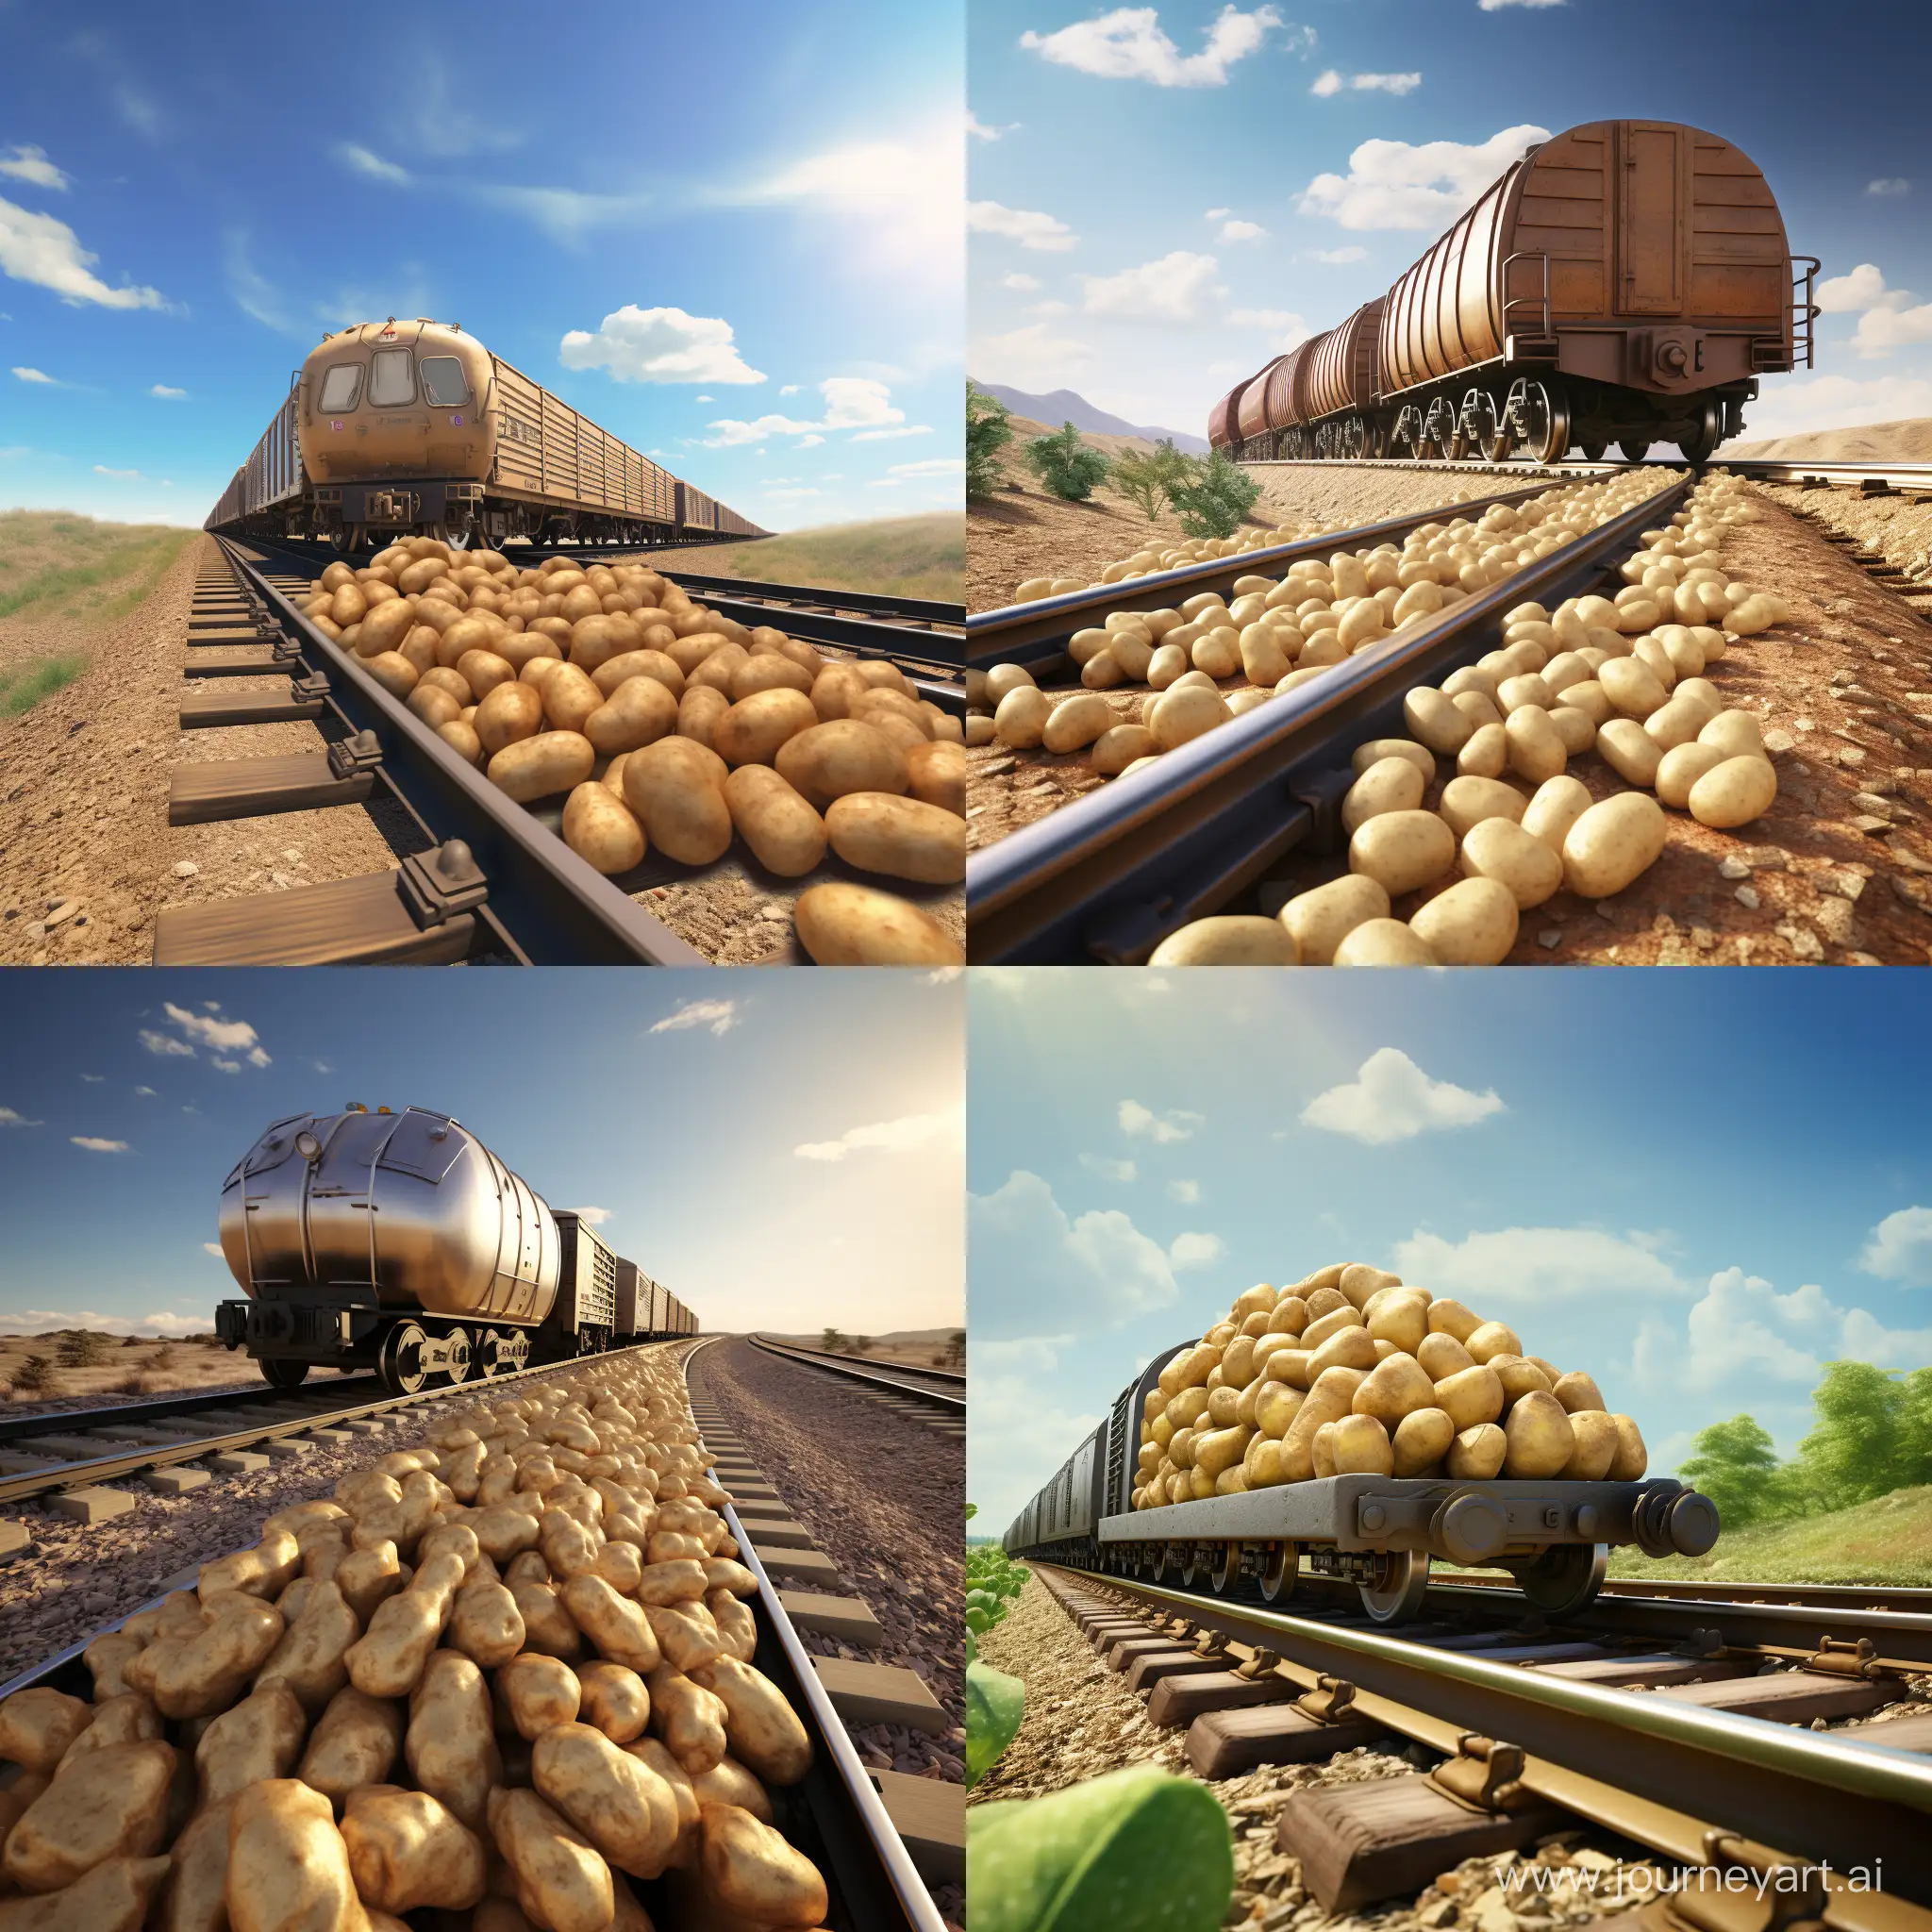 Vibrant-3D-Animation-Potatoes-Transported-by-a-Freight-Train